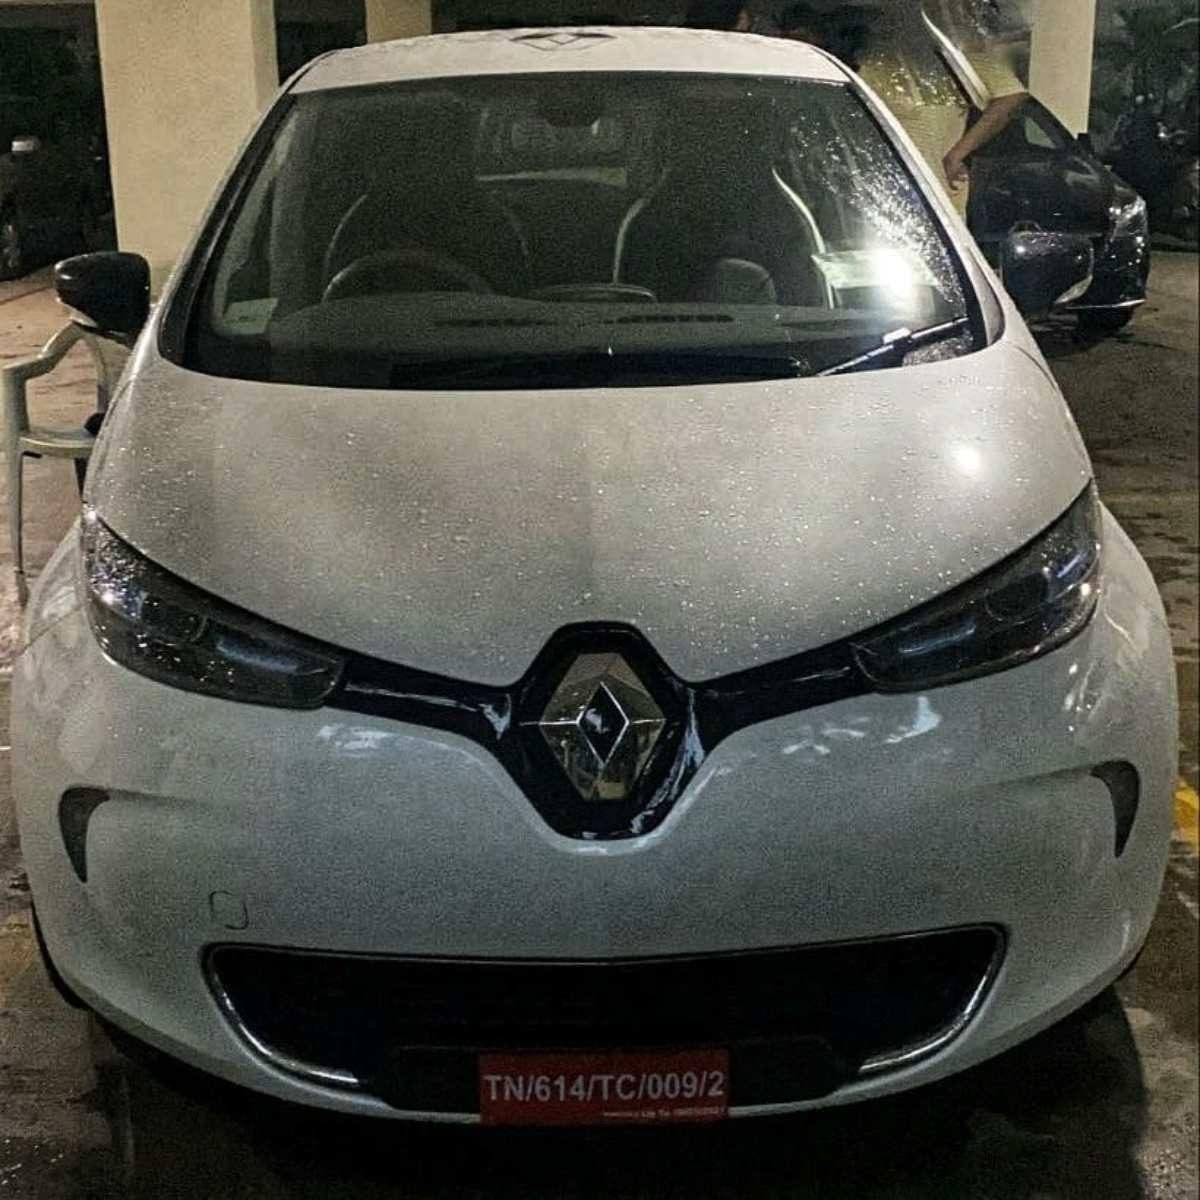 renault zoe ev spied front angle